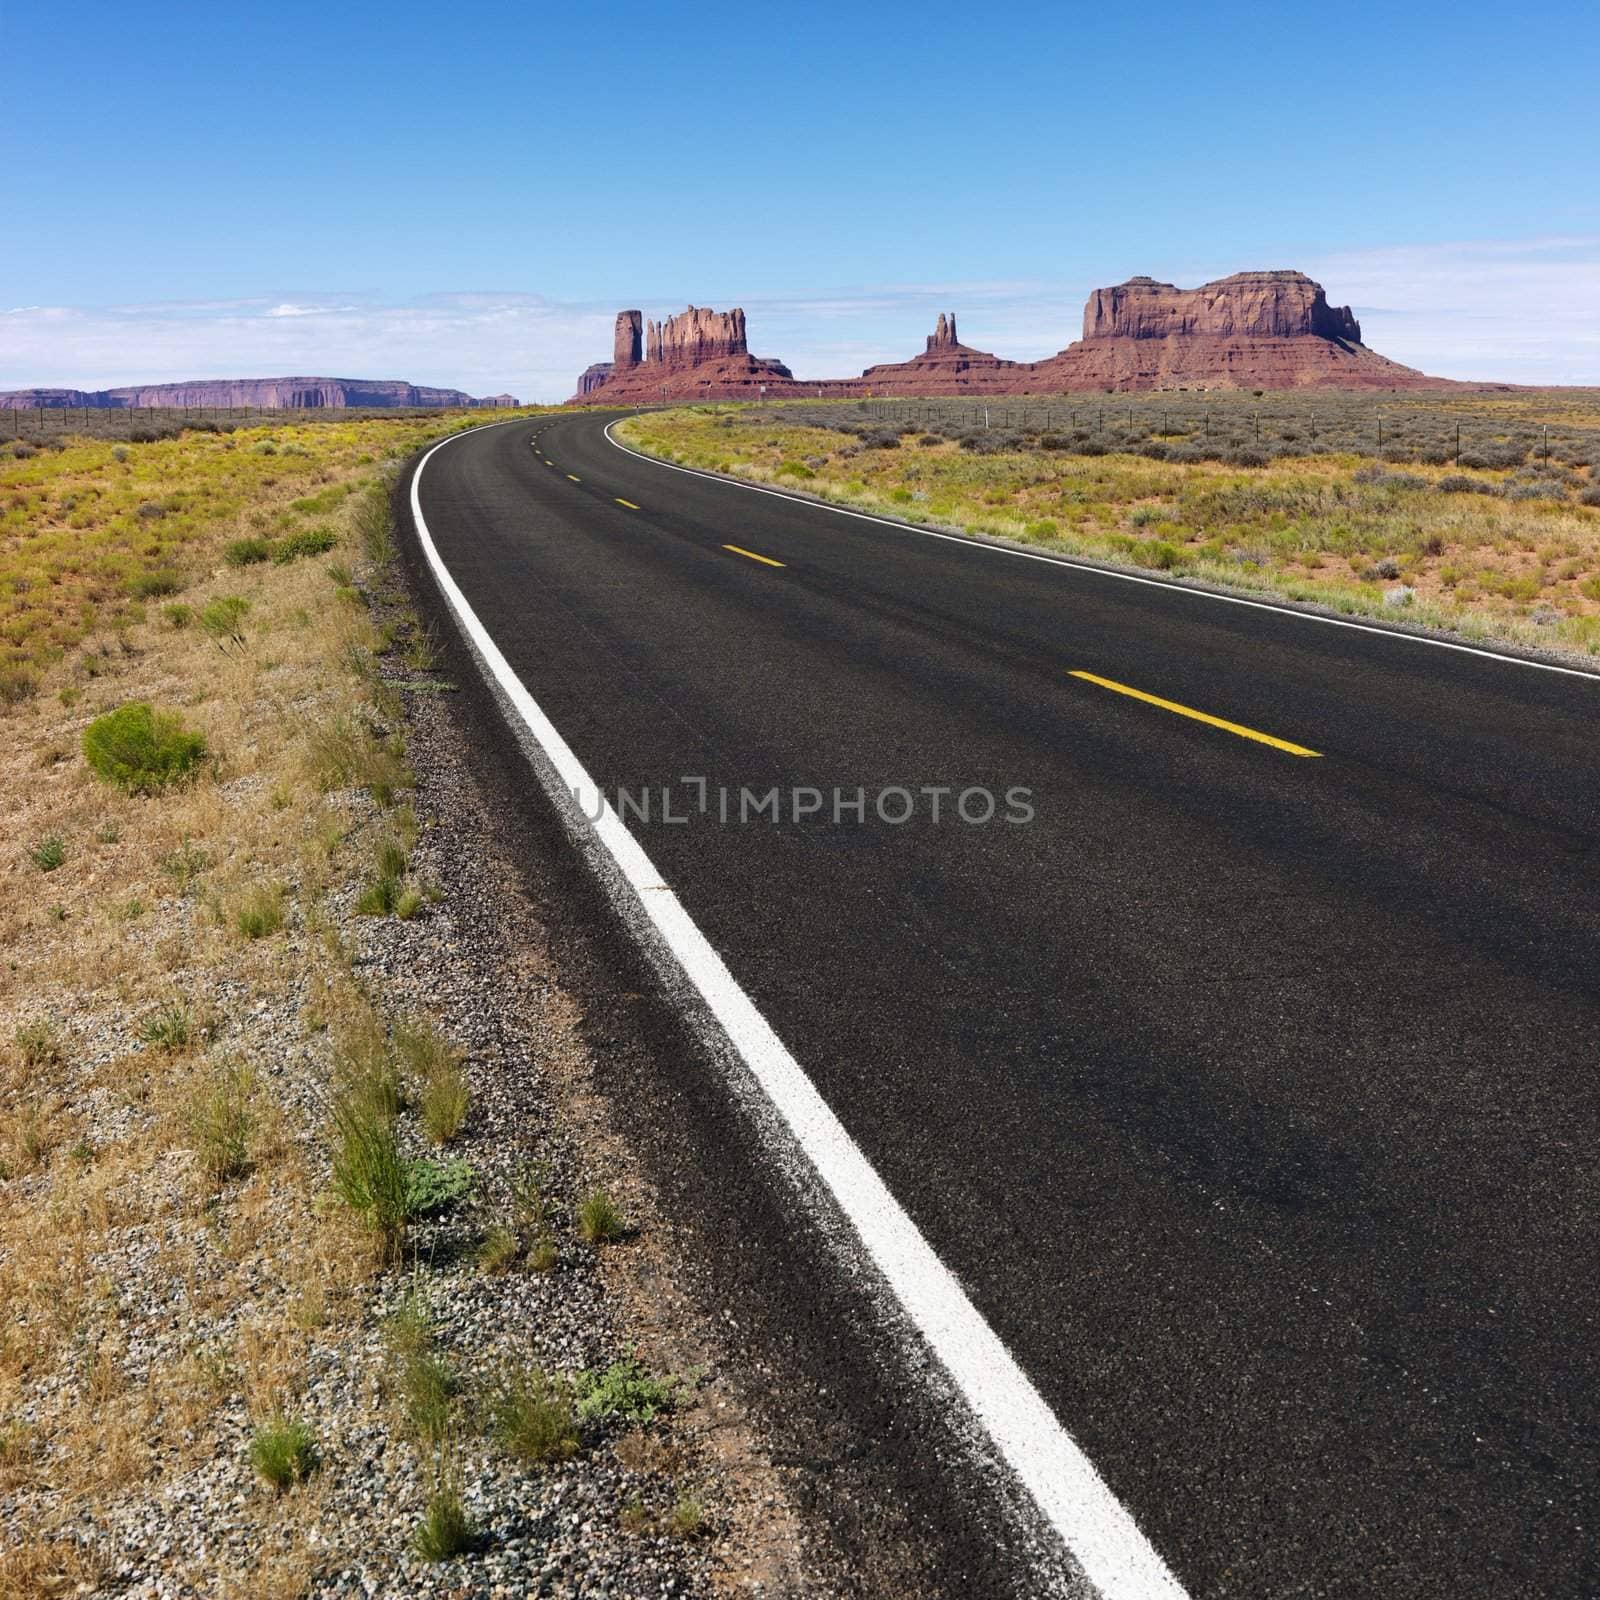 Road in scenic desert landscape with mesa and mountains.